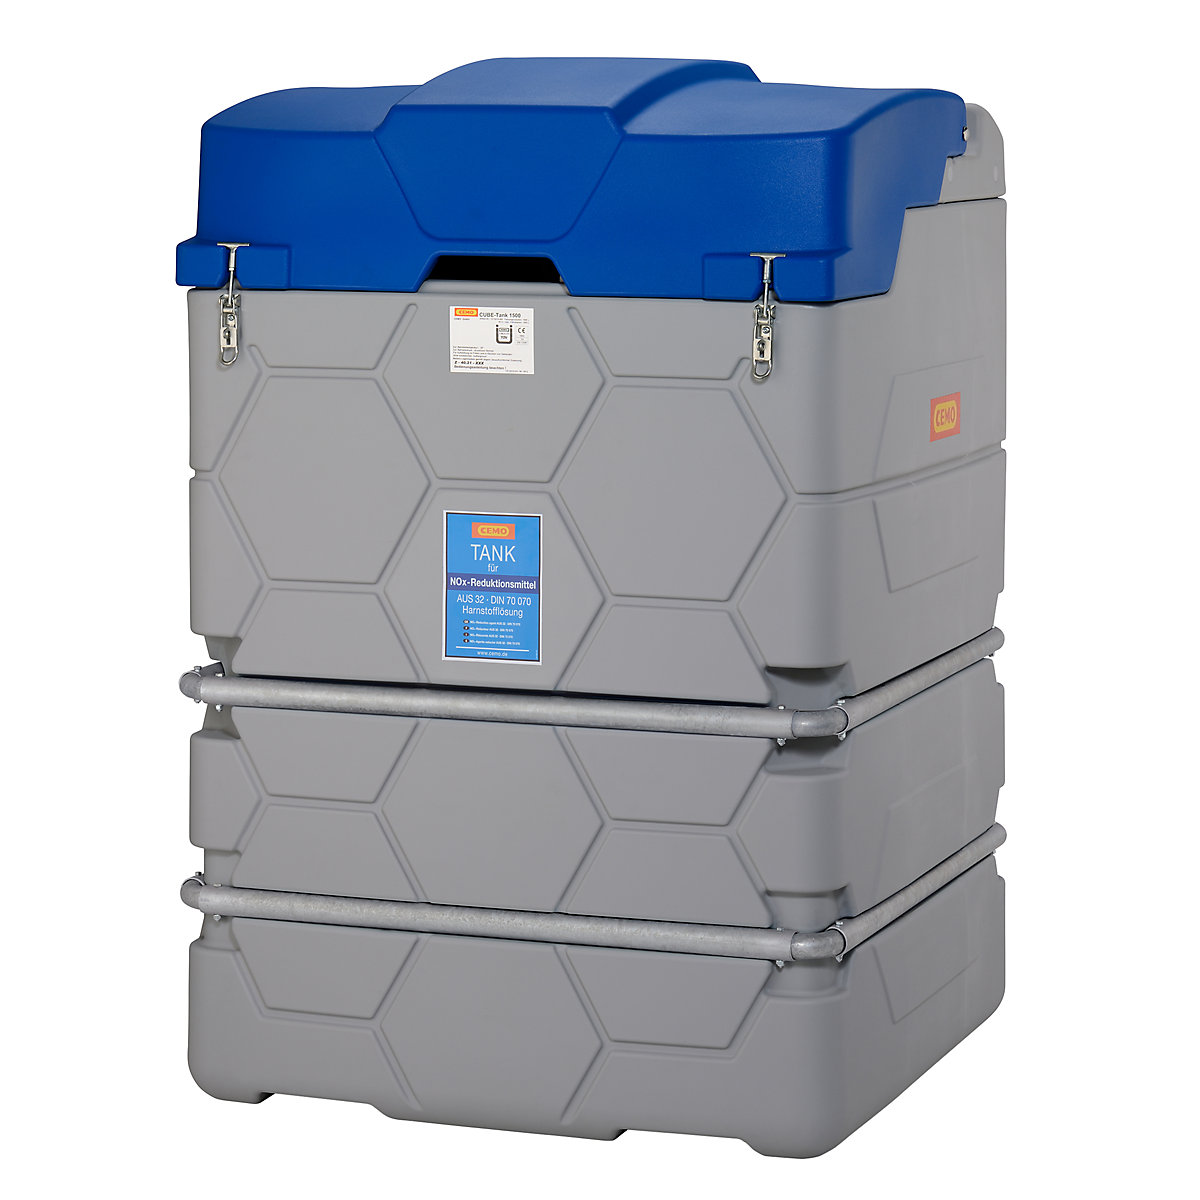 CUBE tank for AUS 32 (AdBlue®) – CEMO